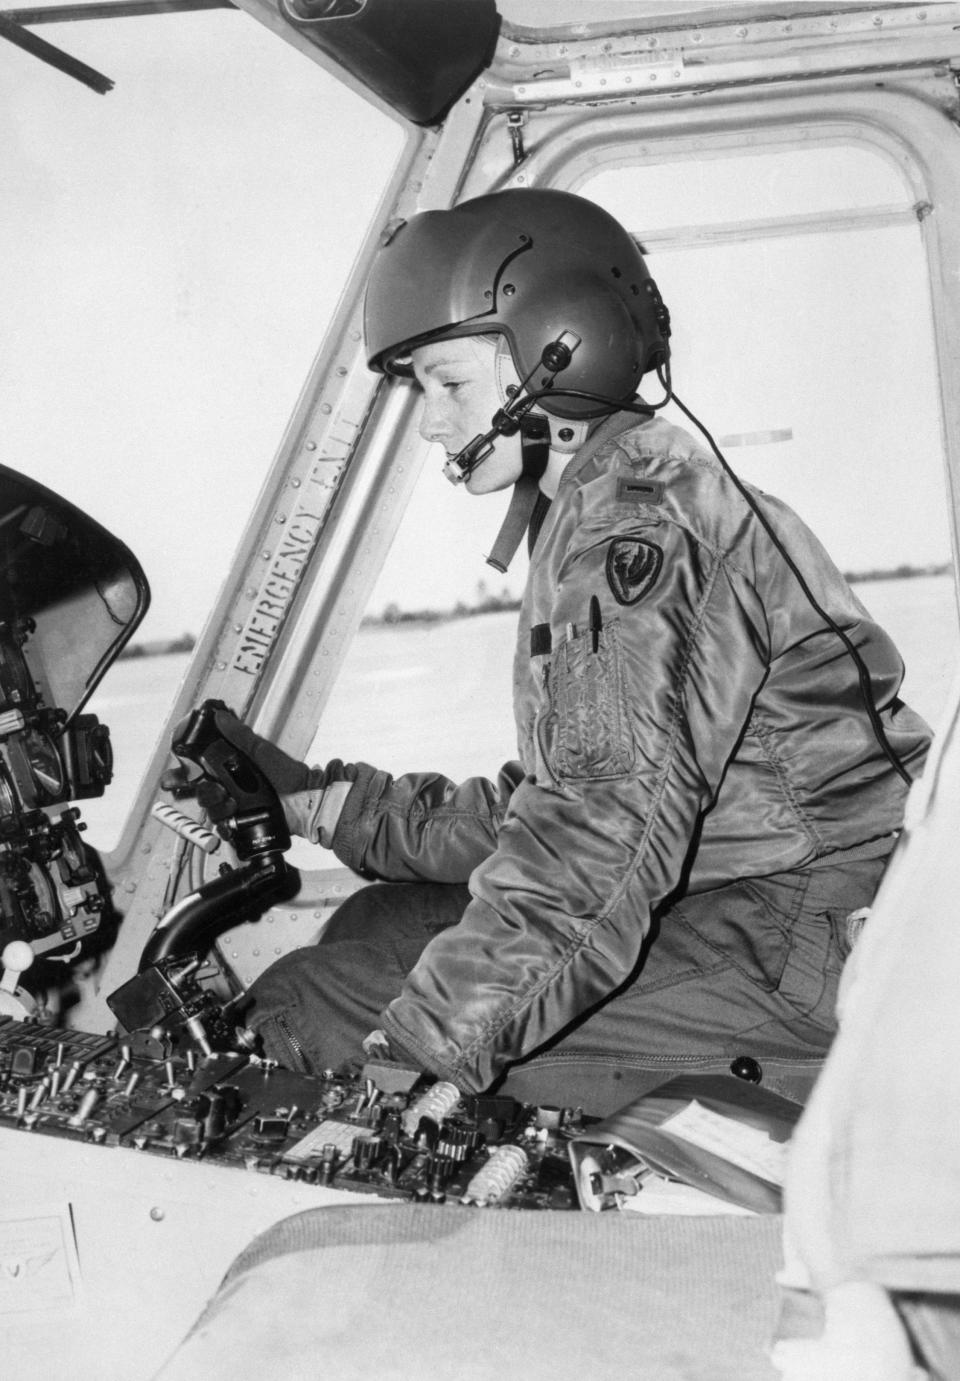 Sally D. Murphy, 25, at the controls of the UH-1 'Huey' helicopter, is recognized in the U.S. Army as its first woman aviator and also its first military helicopter pilot.